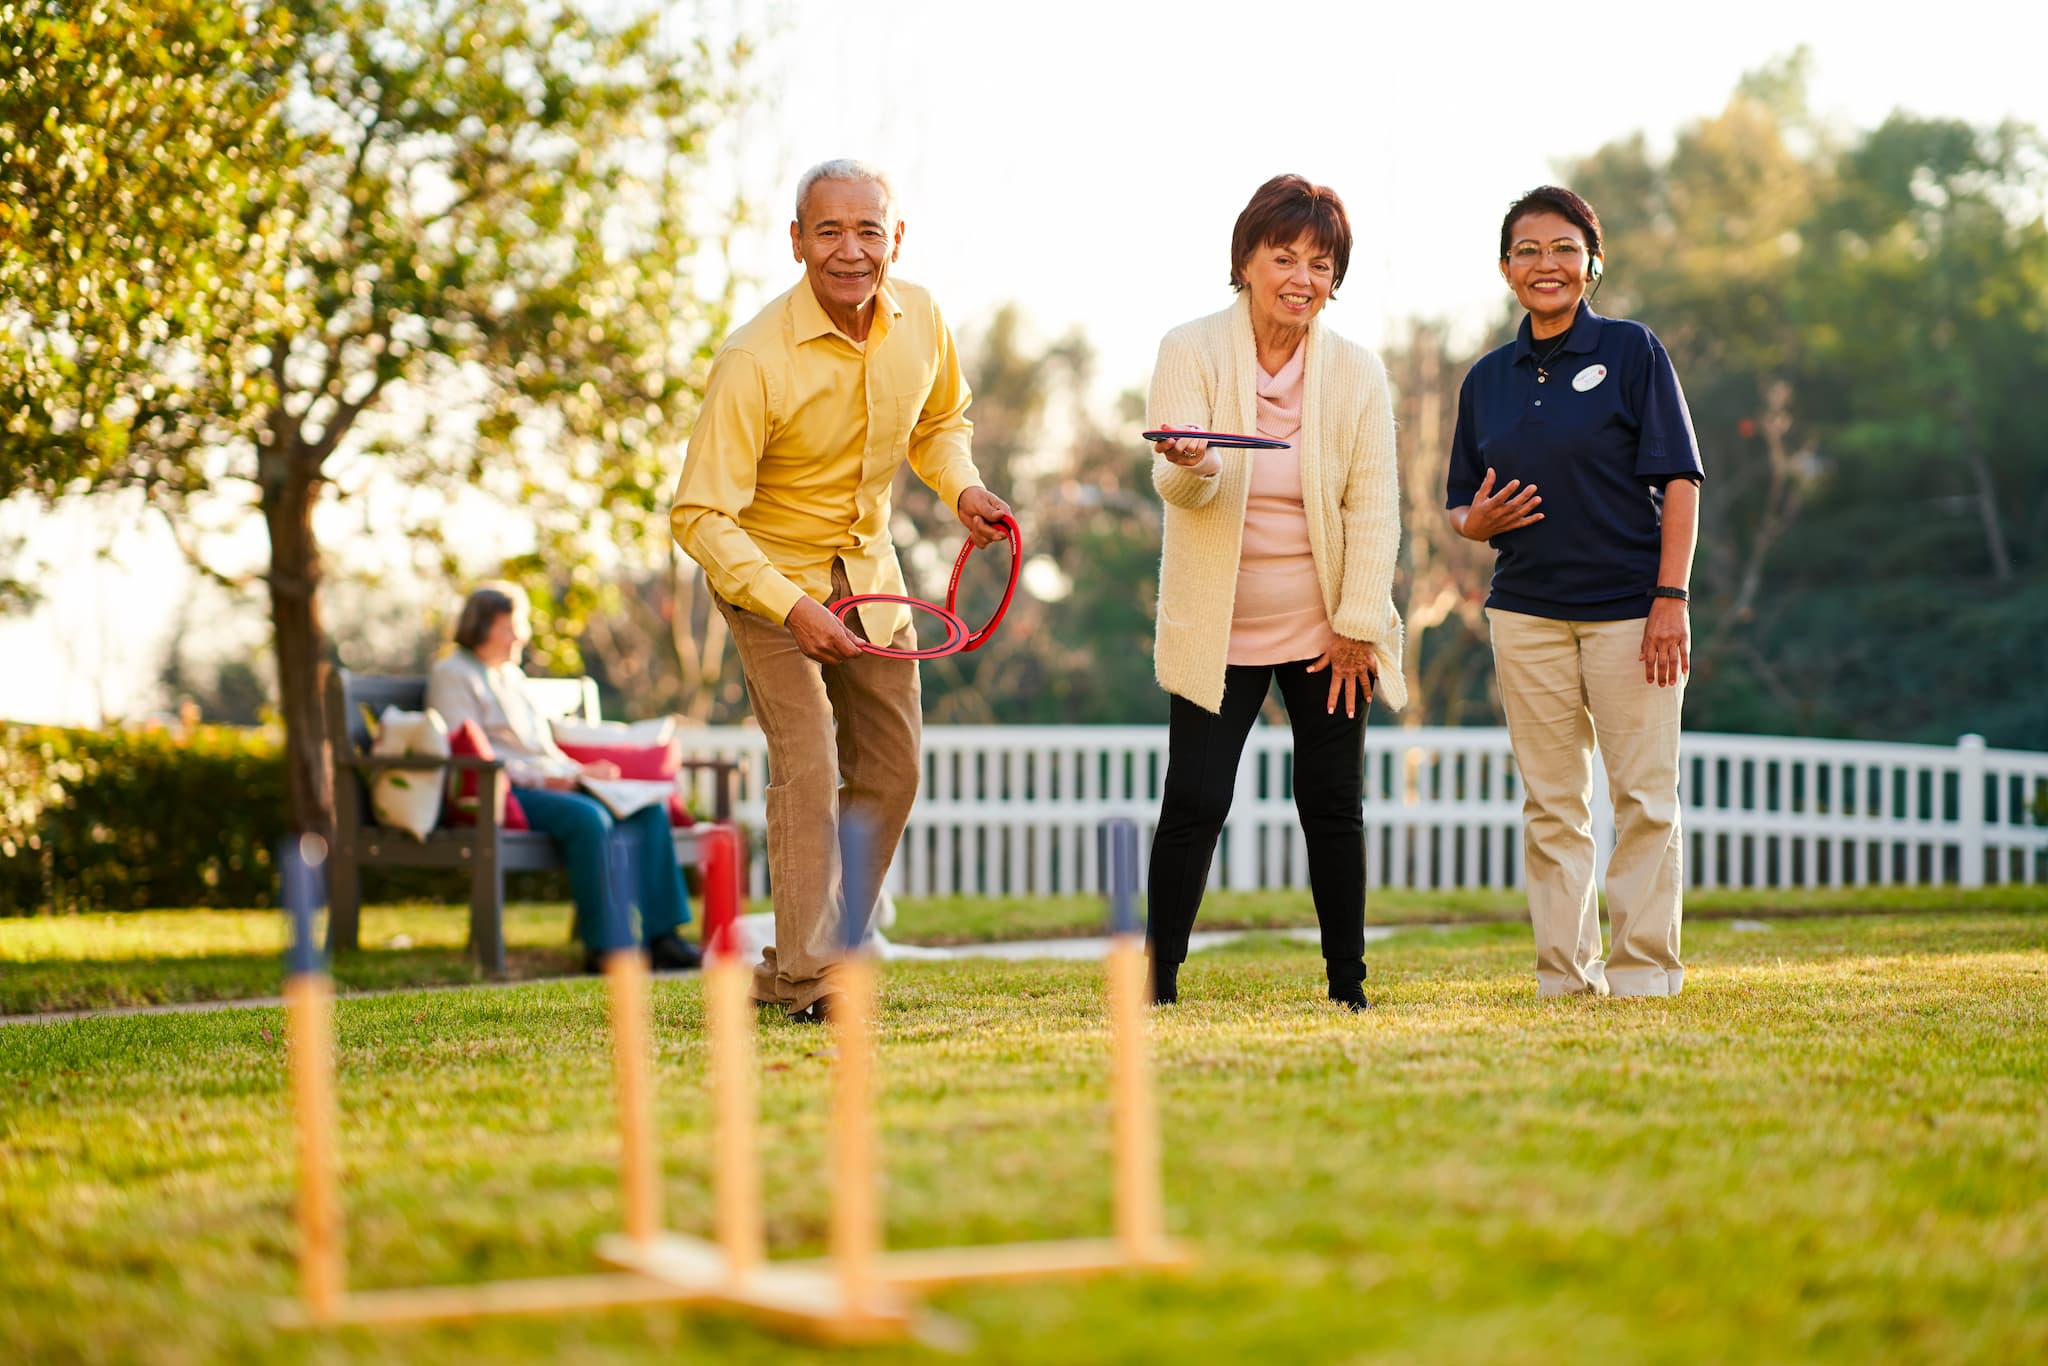 Residents playing a yard game